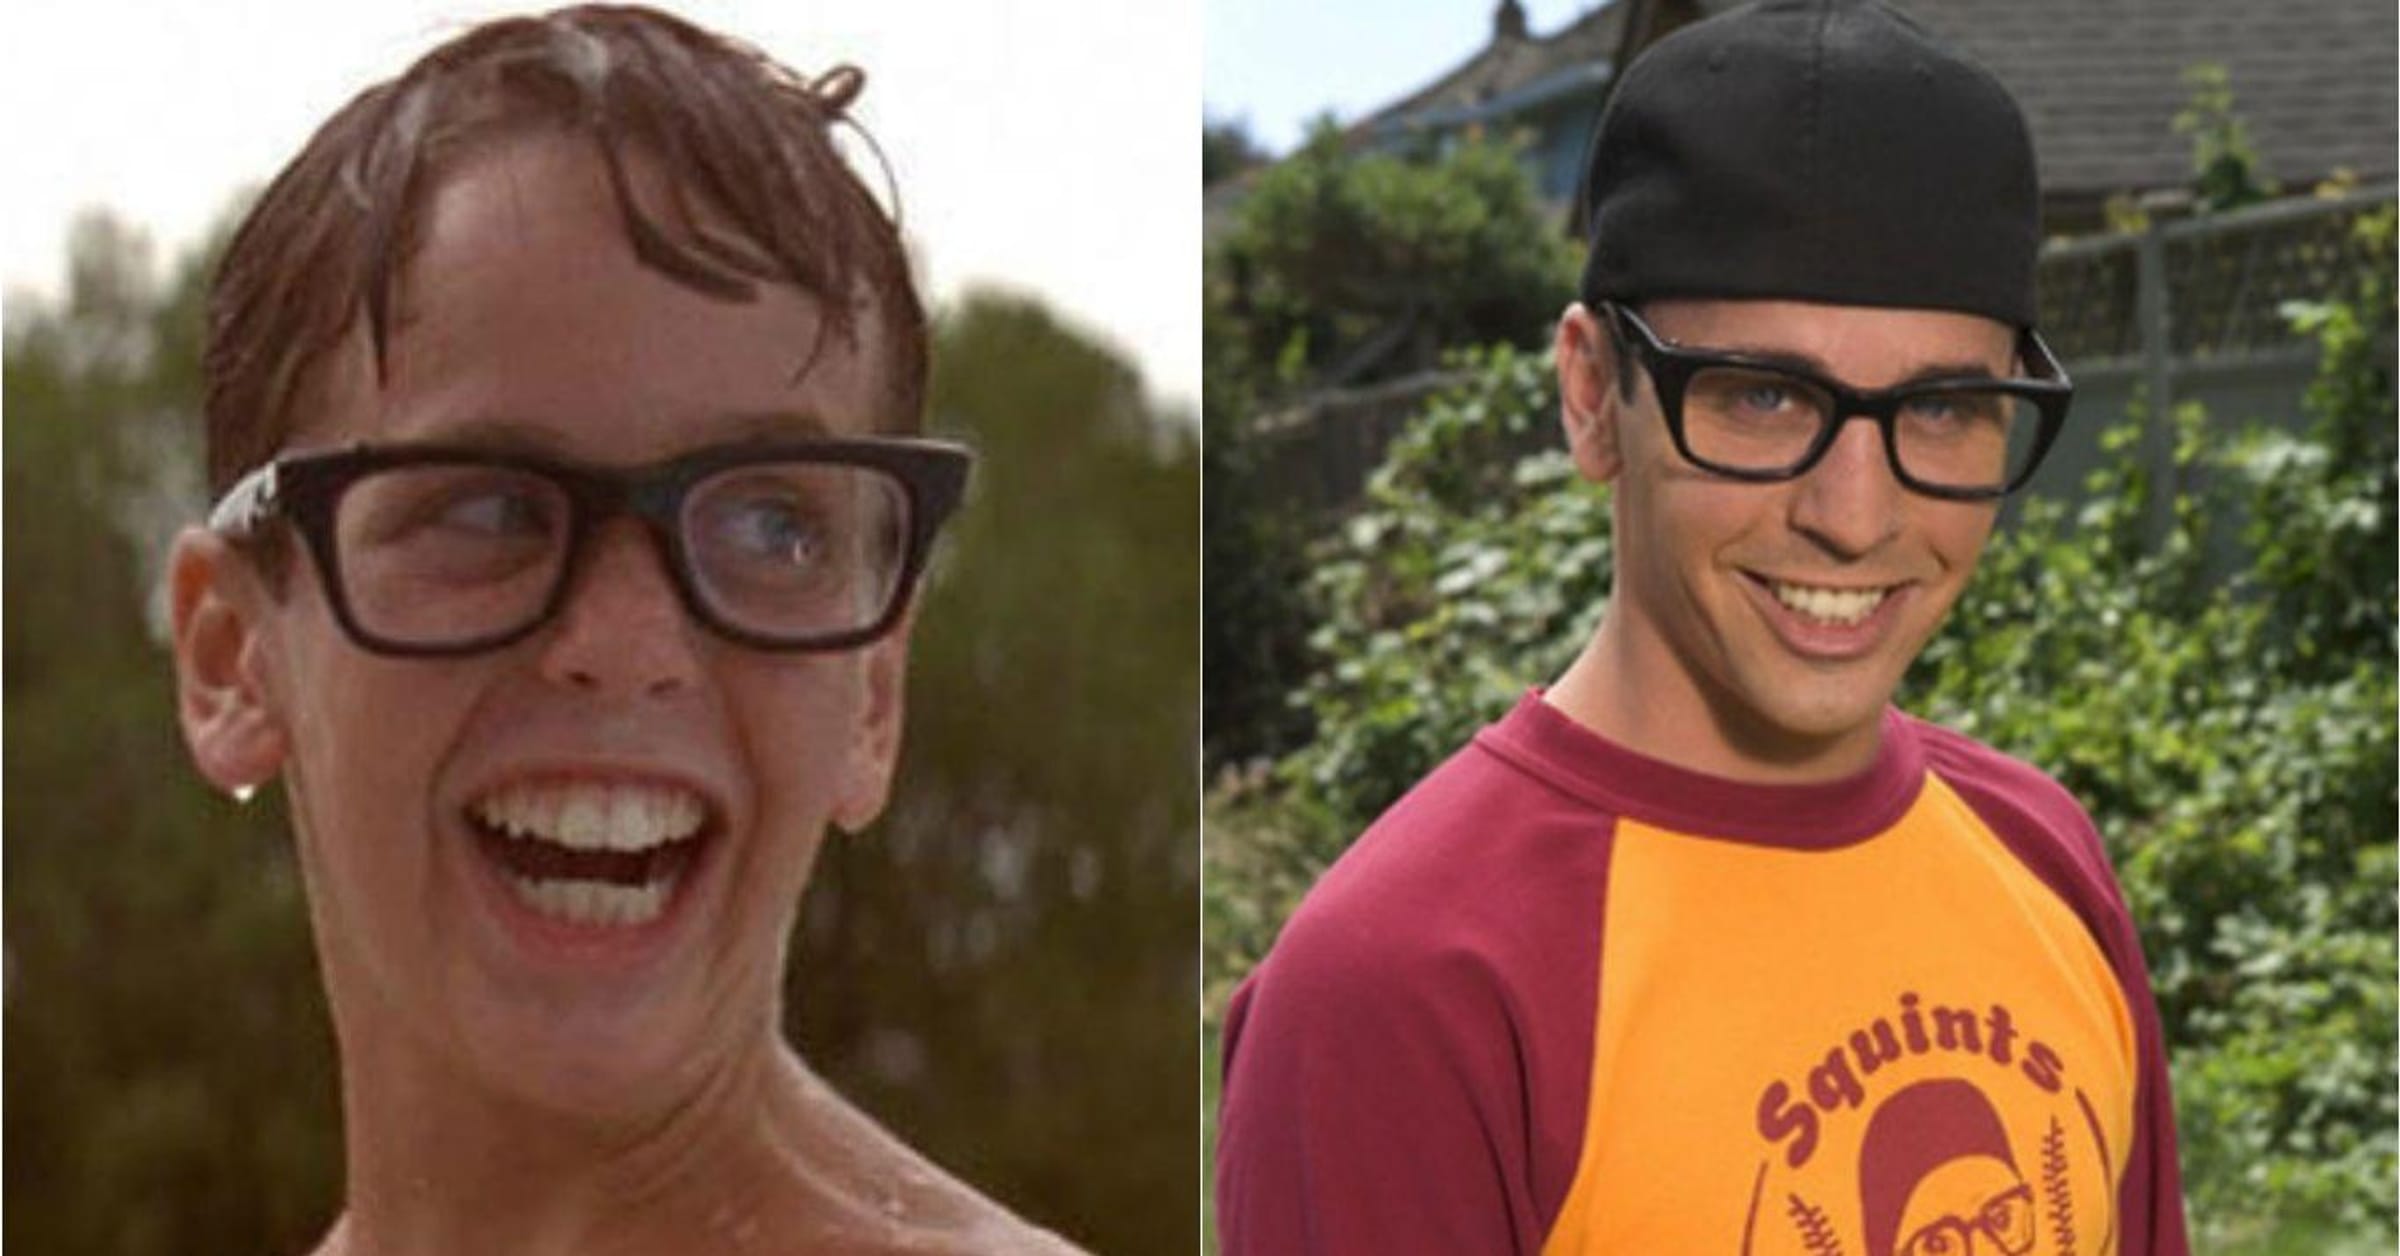 Actors from 'The Sandlot' hit the big leagues, but still look like kids 20  years later